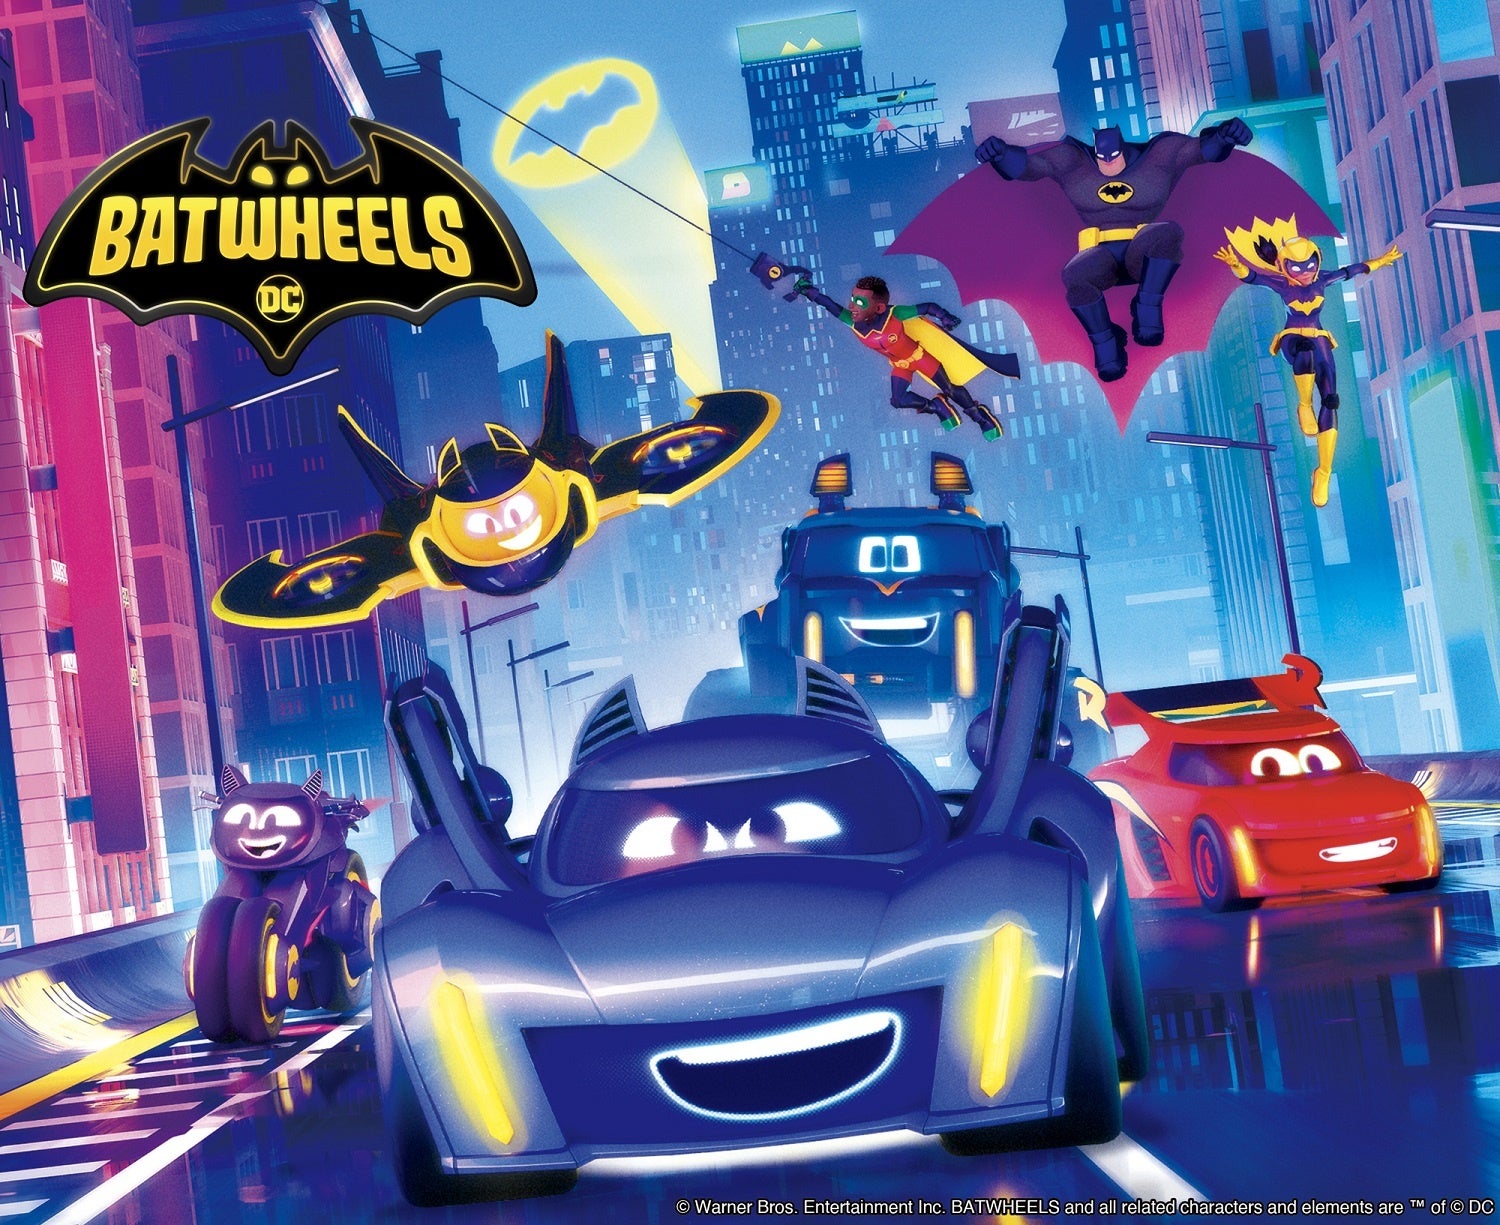 (c) Warner Bros. Entertainment Inc. BATWHEELS and all related characters and elements are TM of (c)  DC